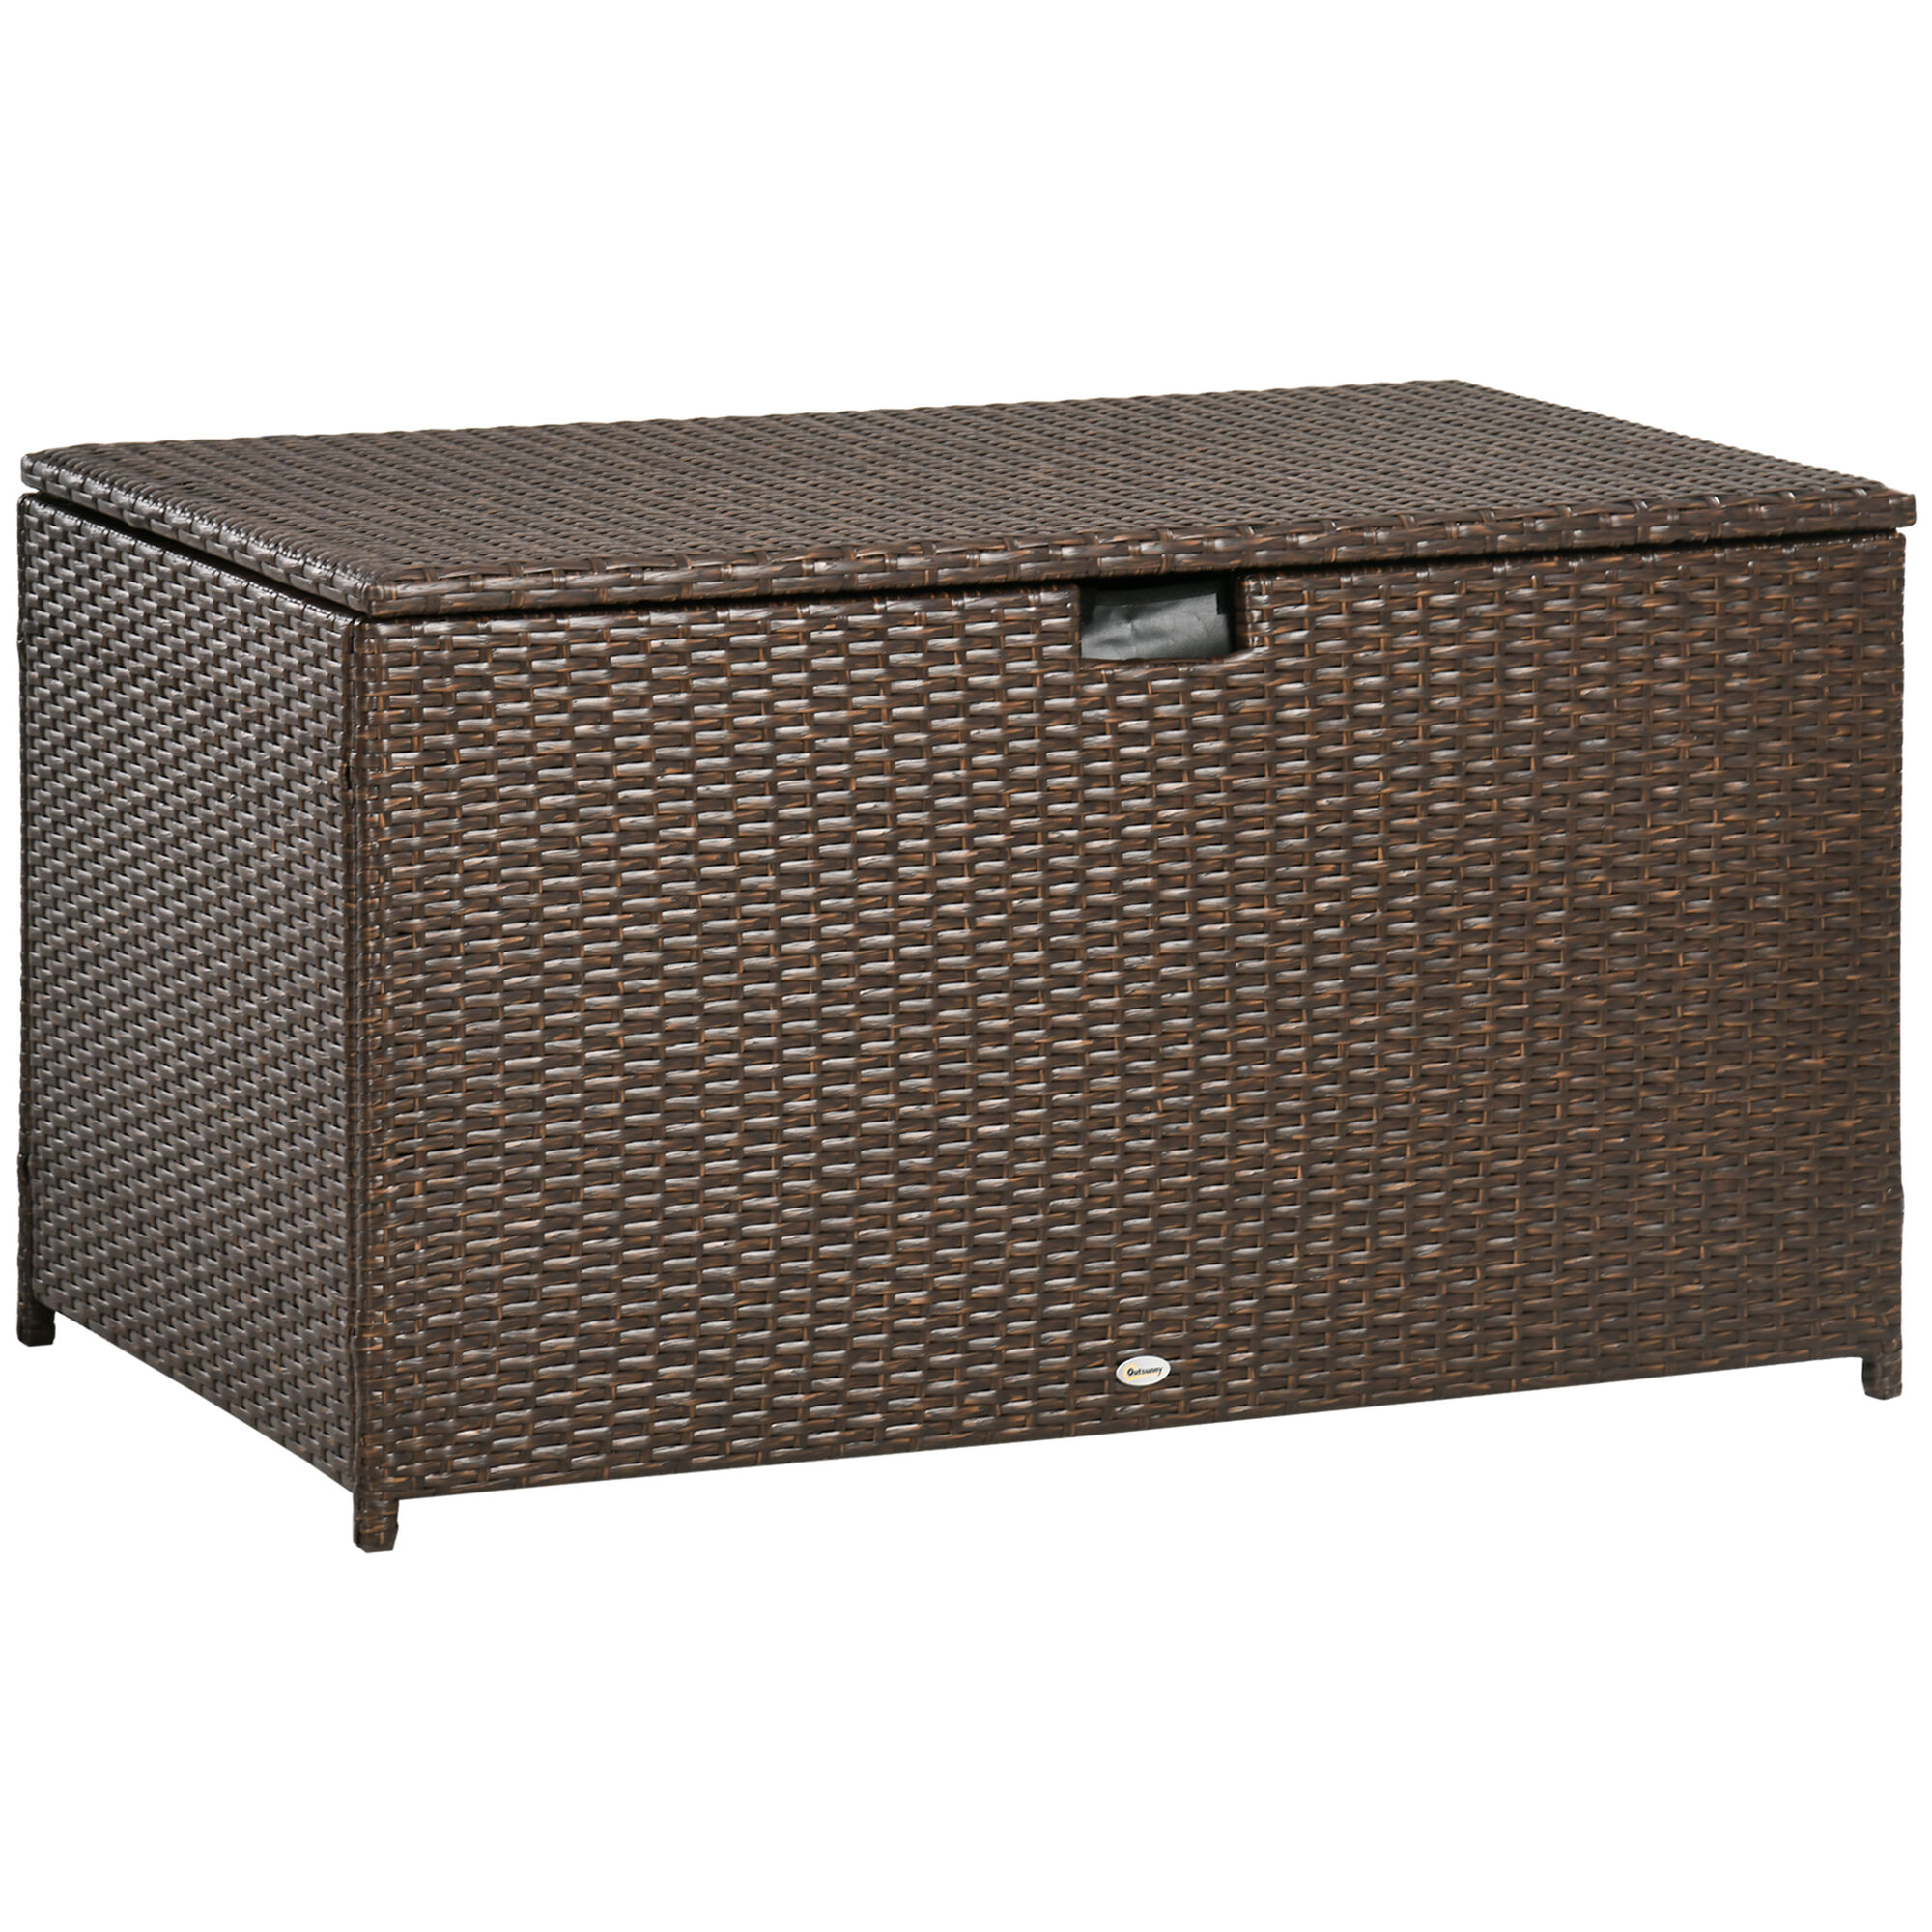 Outsunny Outdoor Deck Box, PE Rattan Wicker with Liner, Hydraulic Lift, and A Handle for Indoor, Outdoor, Patio, Pool, Toys, Garden Tools, Brown